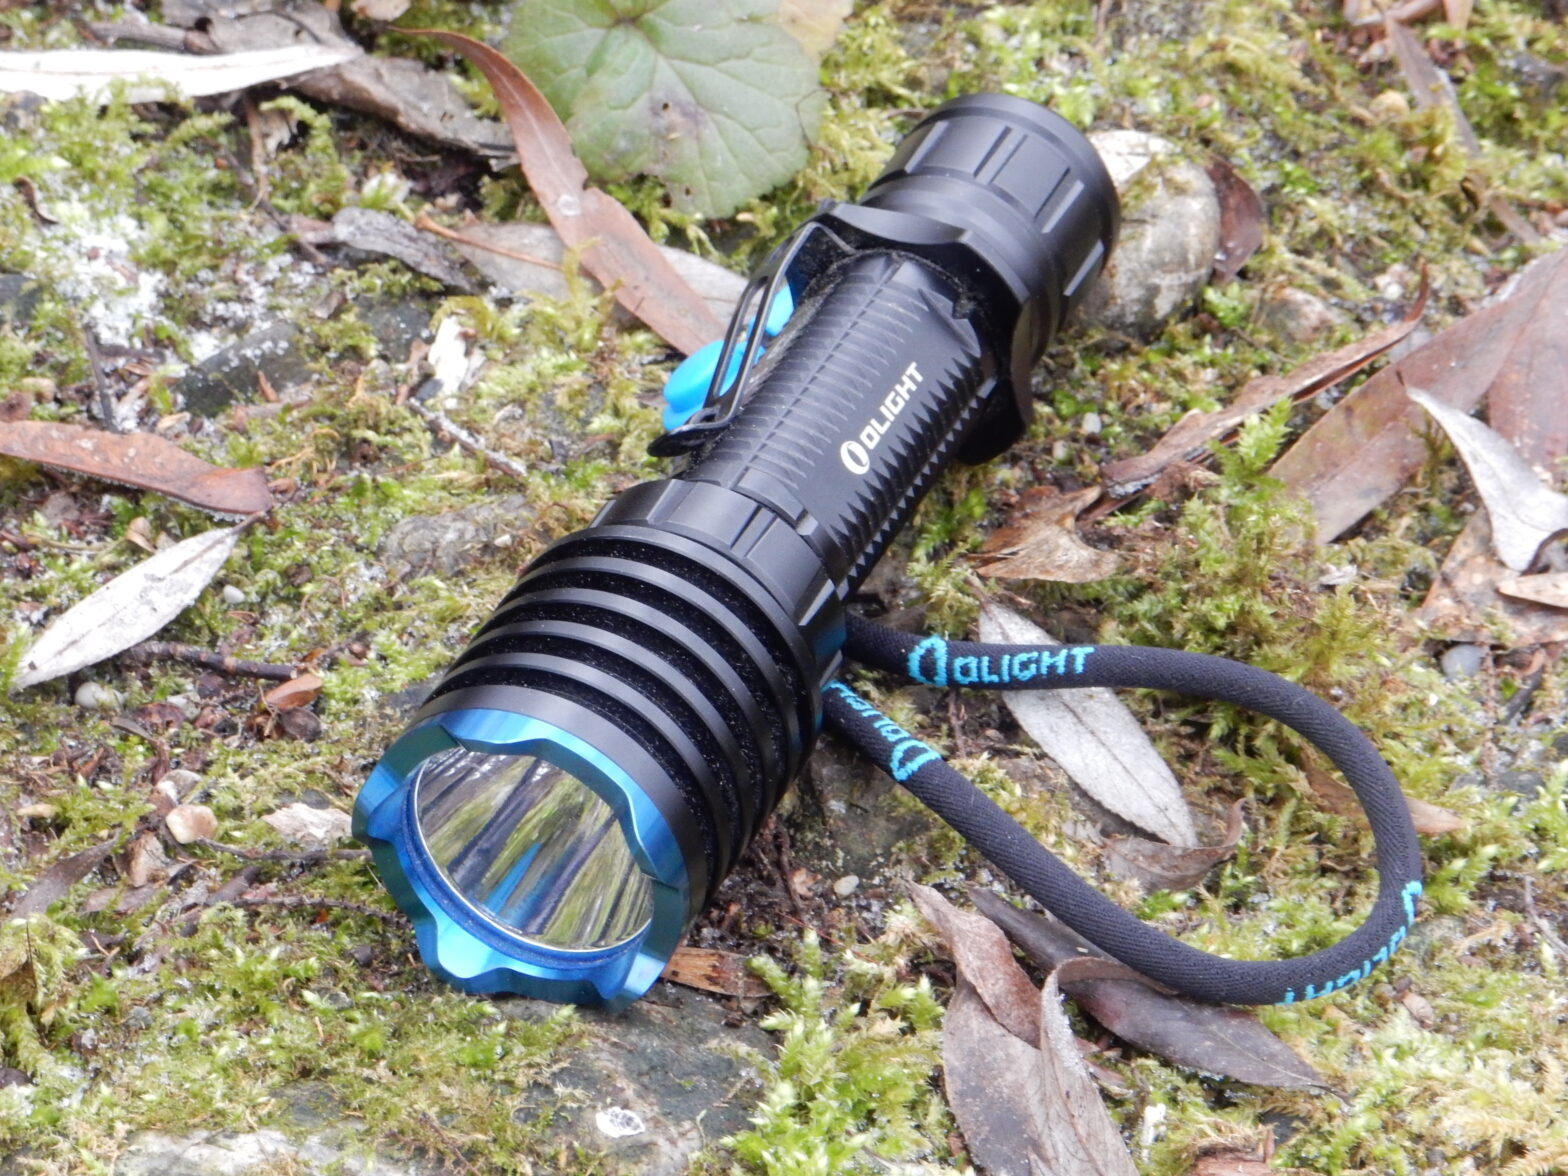 Warrior X Pro from Olight – great tactical light [Review]